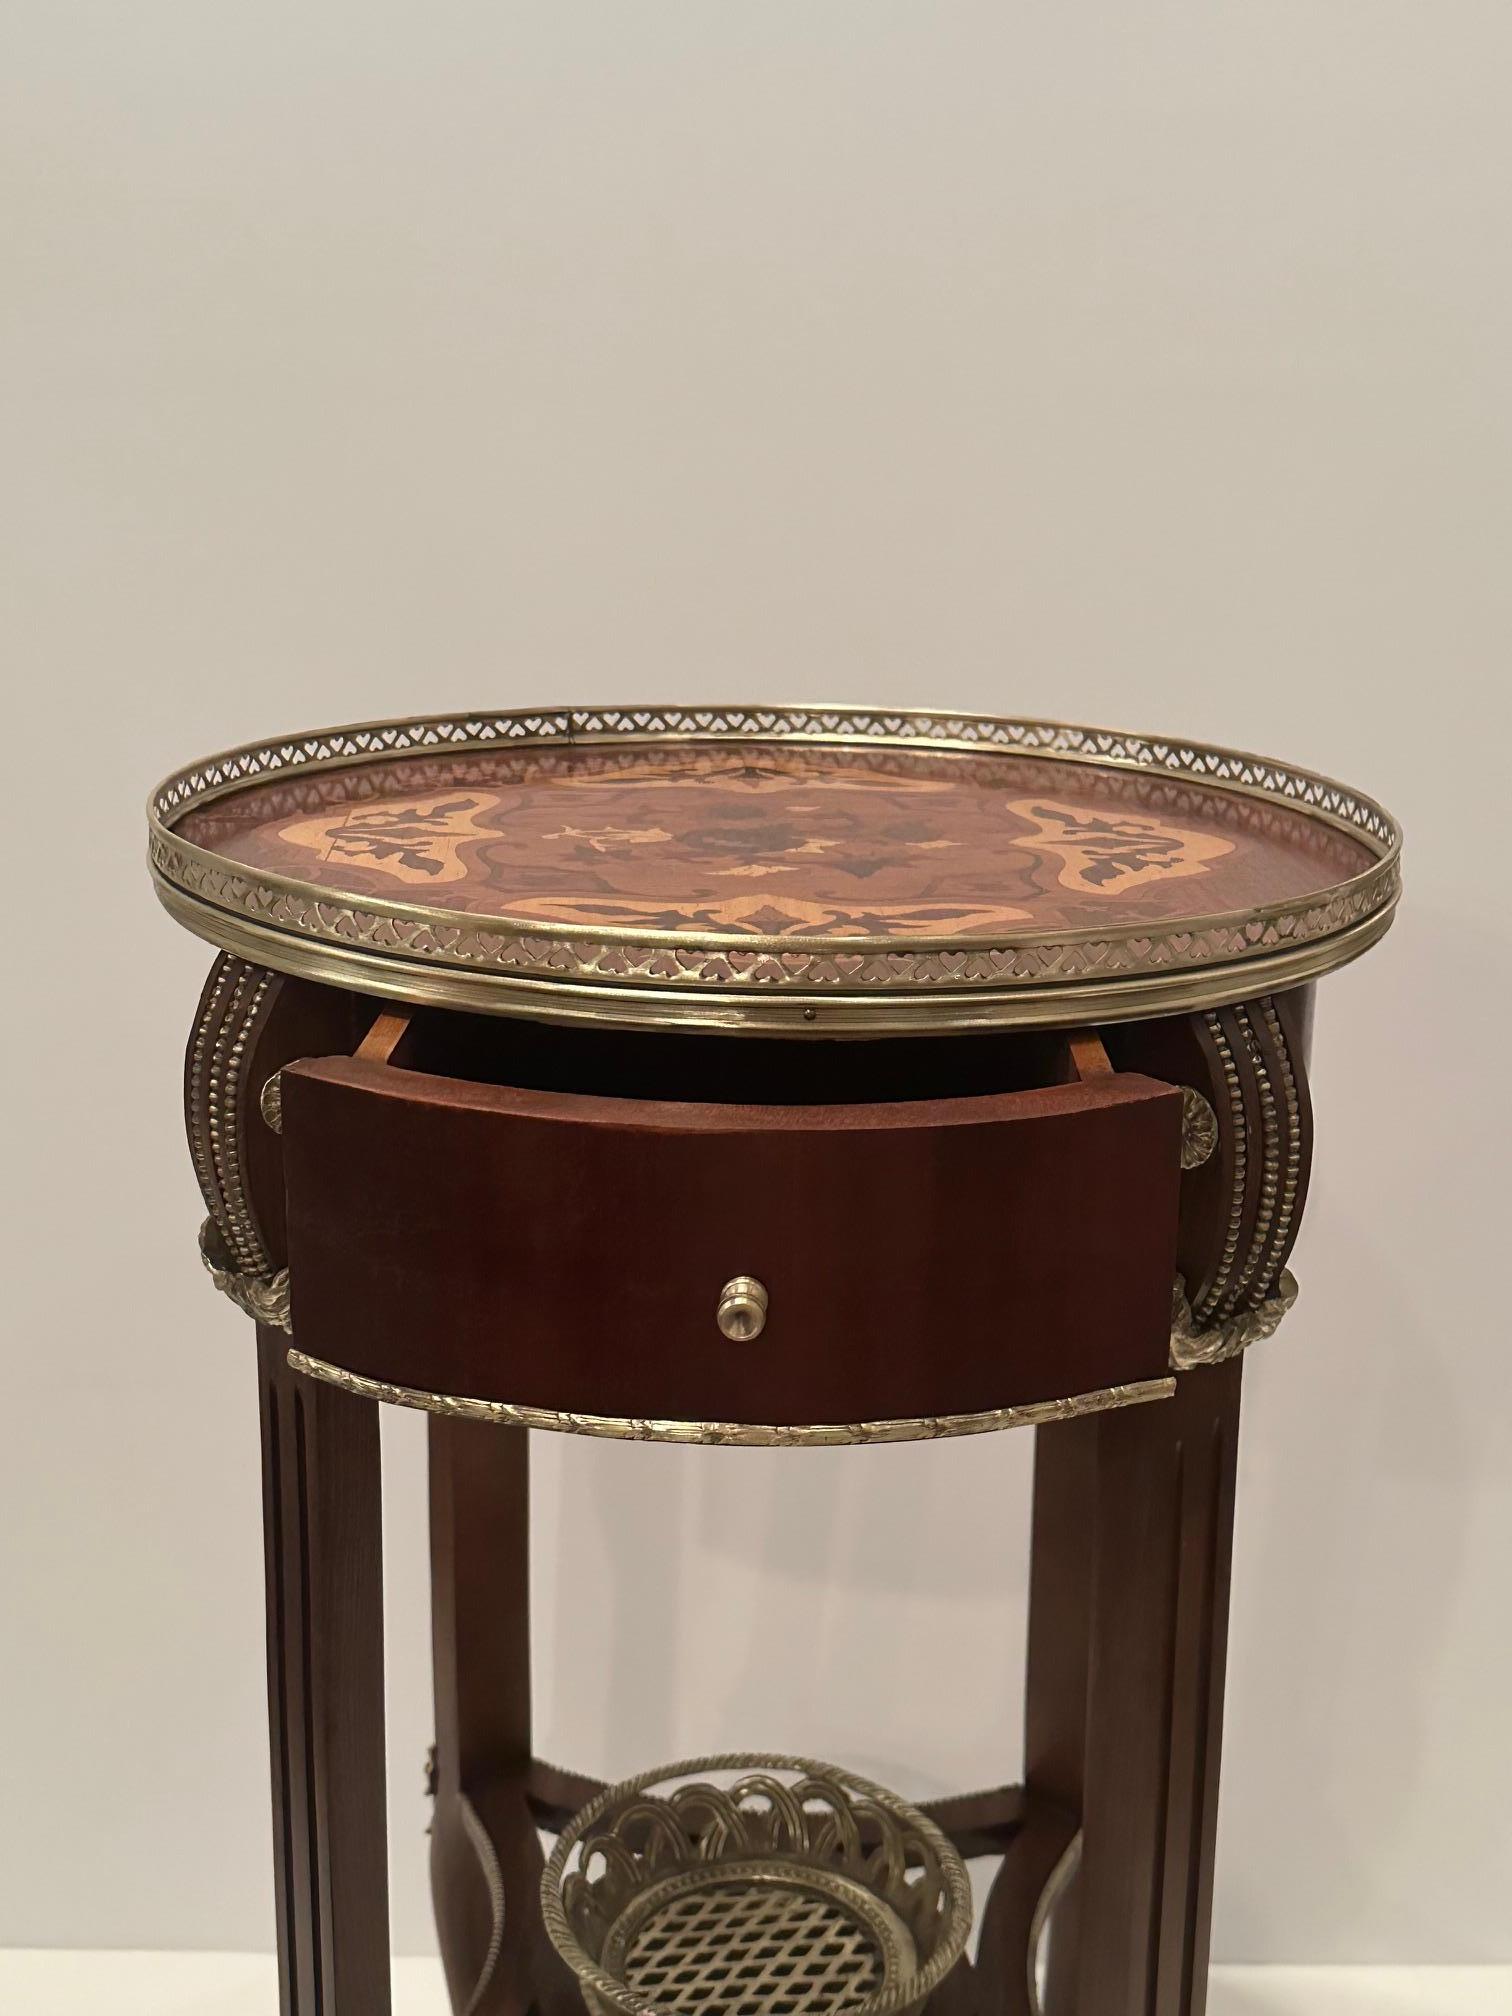 Sumptuous Round Mahogany Inlaid Side Table with Bronze Mounts For Sale 6